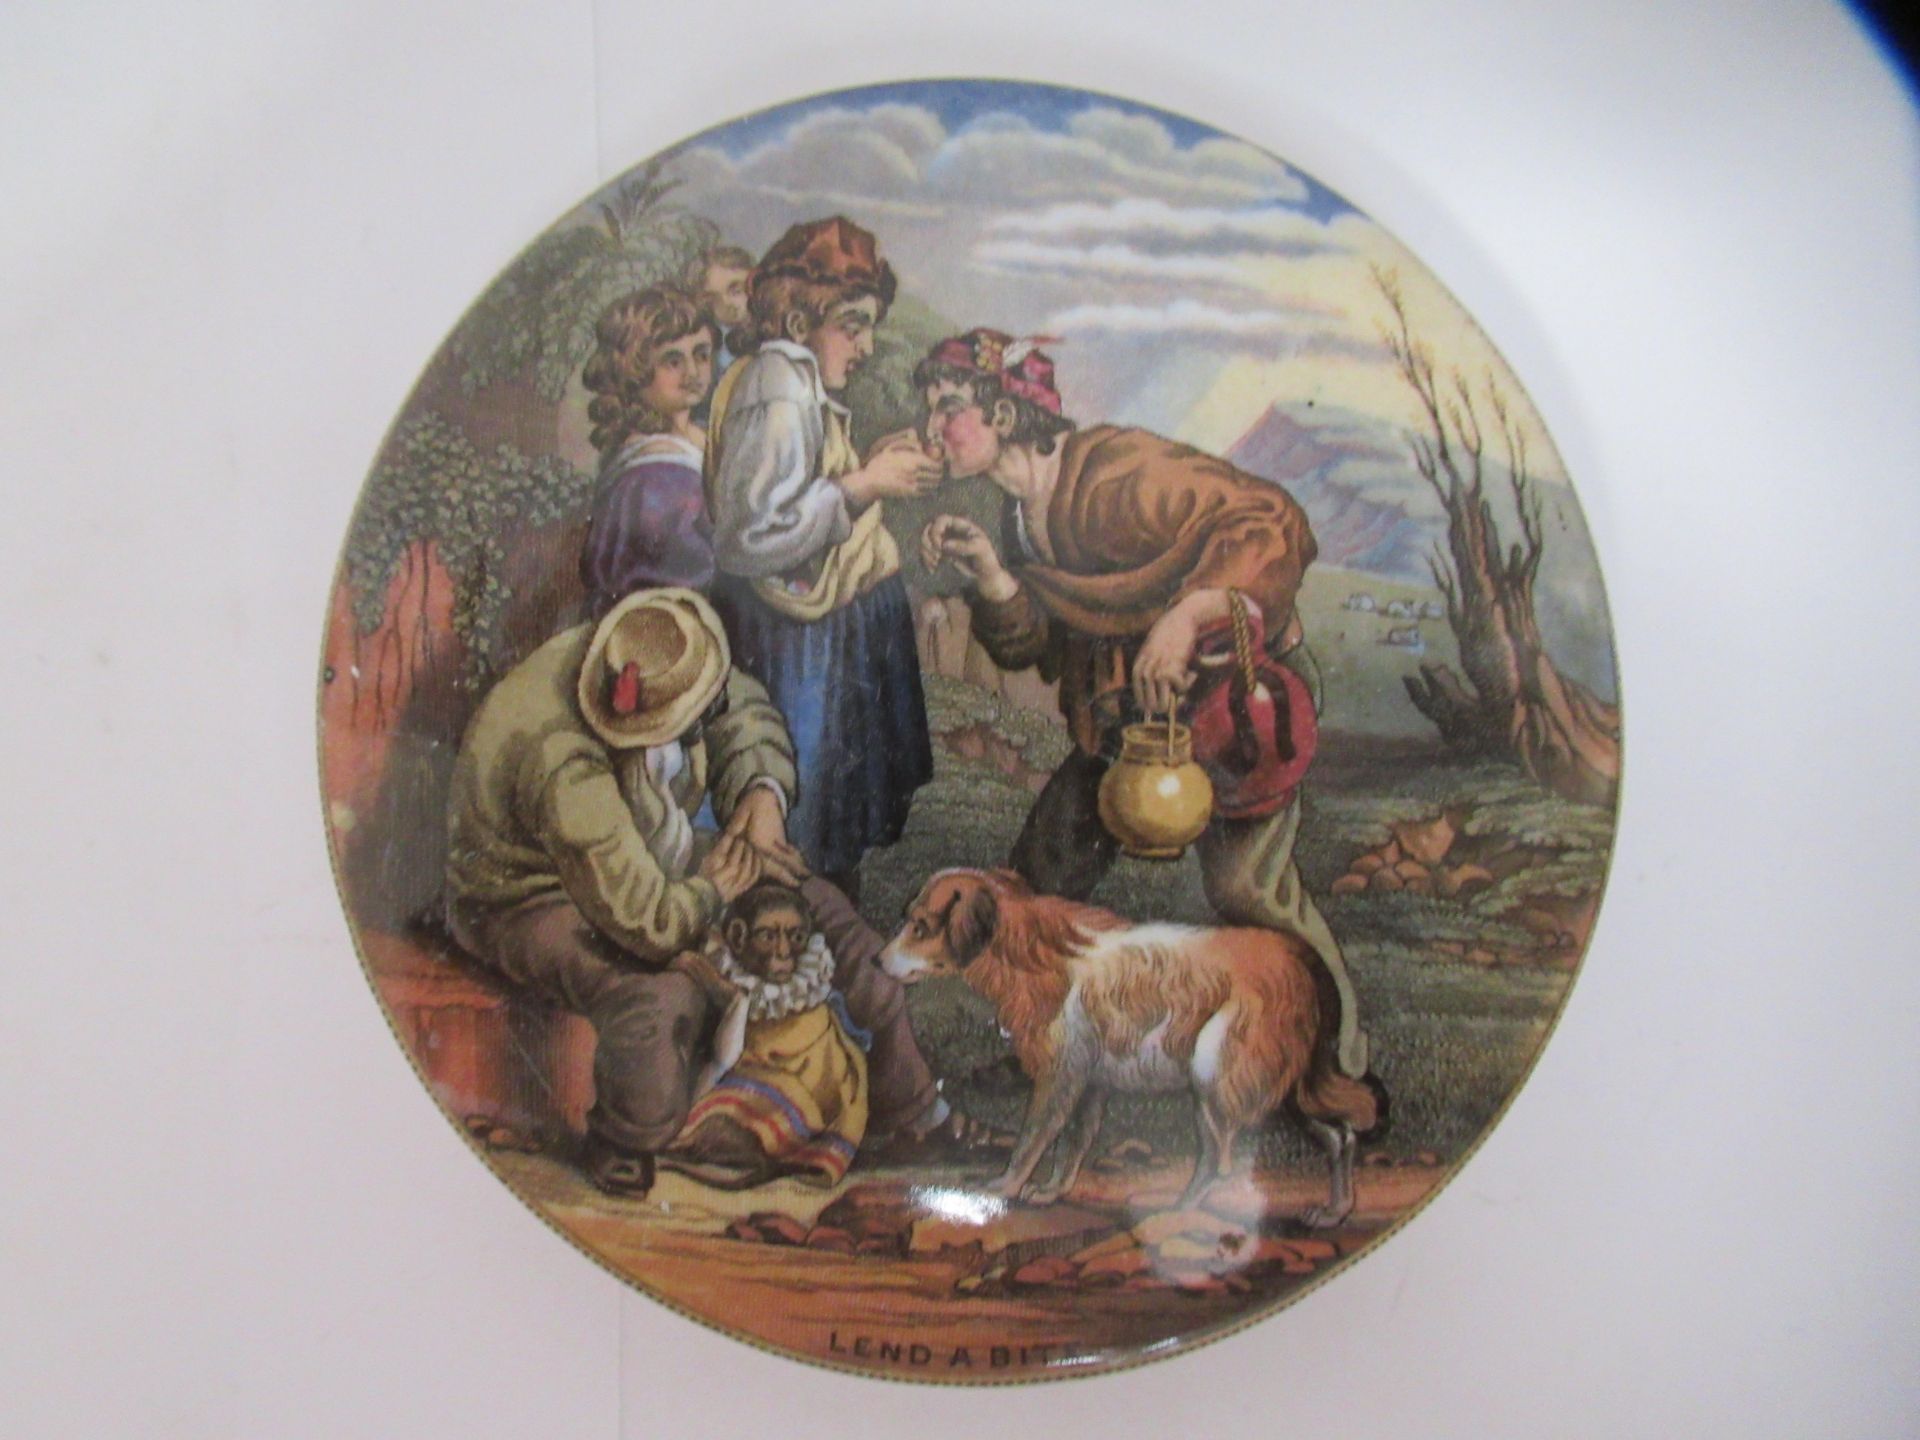 6x Prattware ceramic lids including 'The Sports Man', 'Belle Vue Pegwell Bay', 'Lend a Bite', and 'C - Image 19 of 23